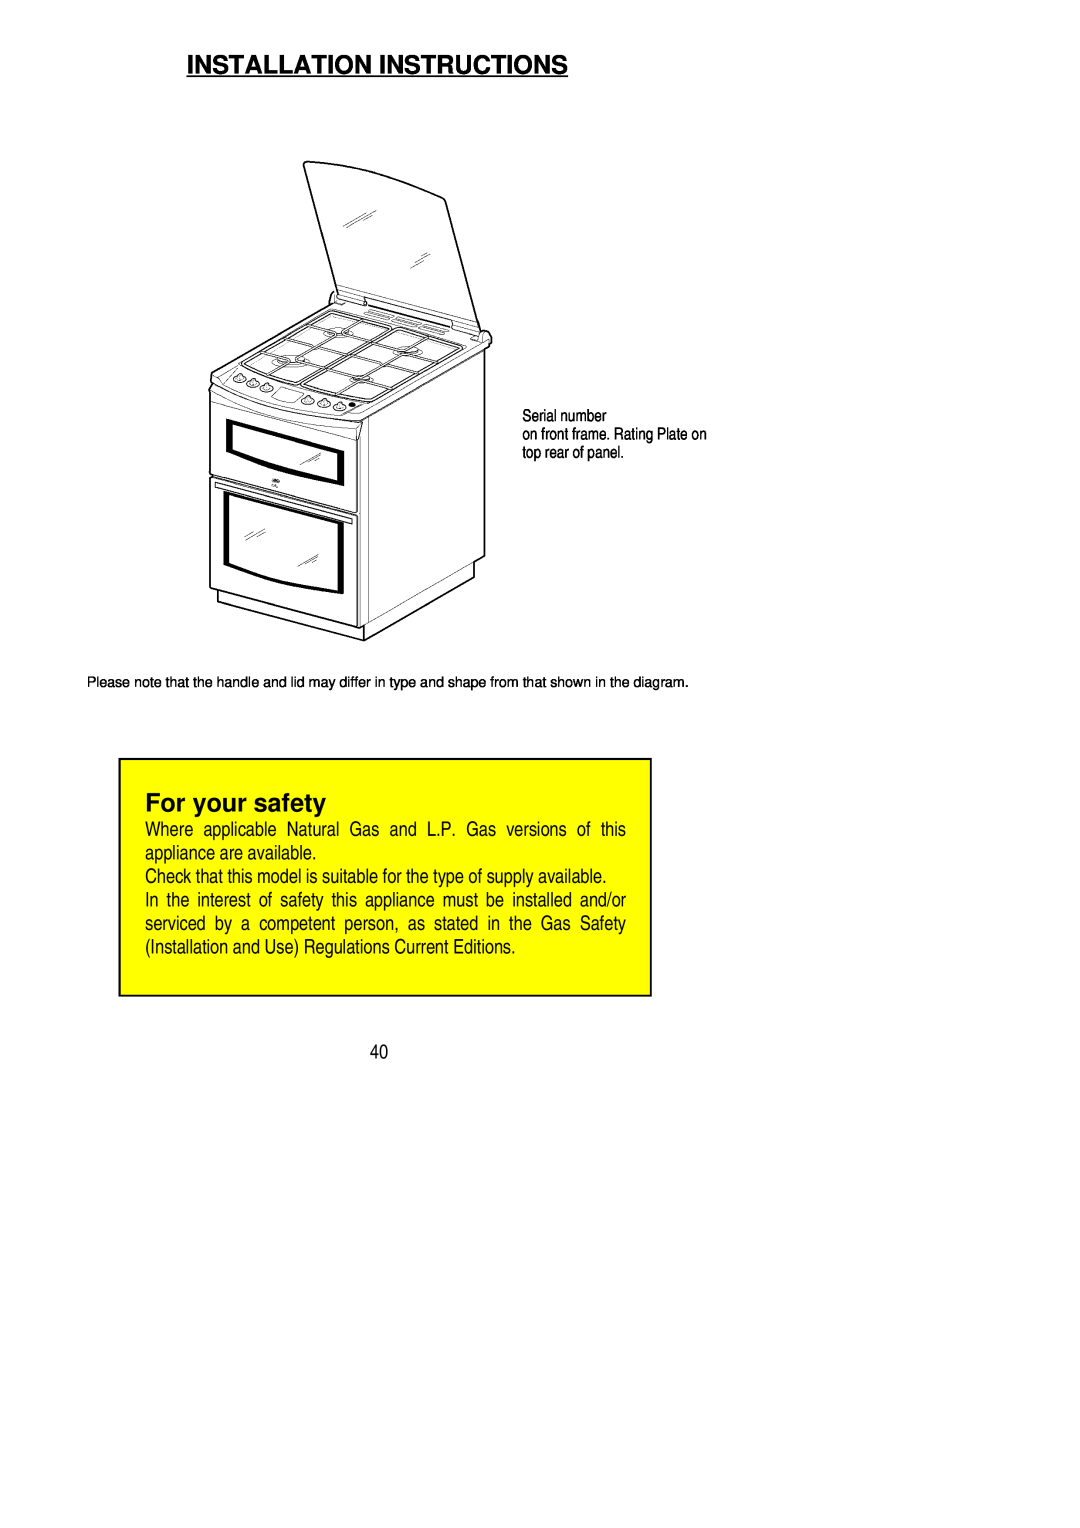 Electrolux CSG 558 installation instructions Installation Instructions, For your safety, Serial number 